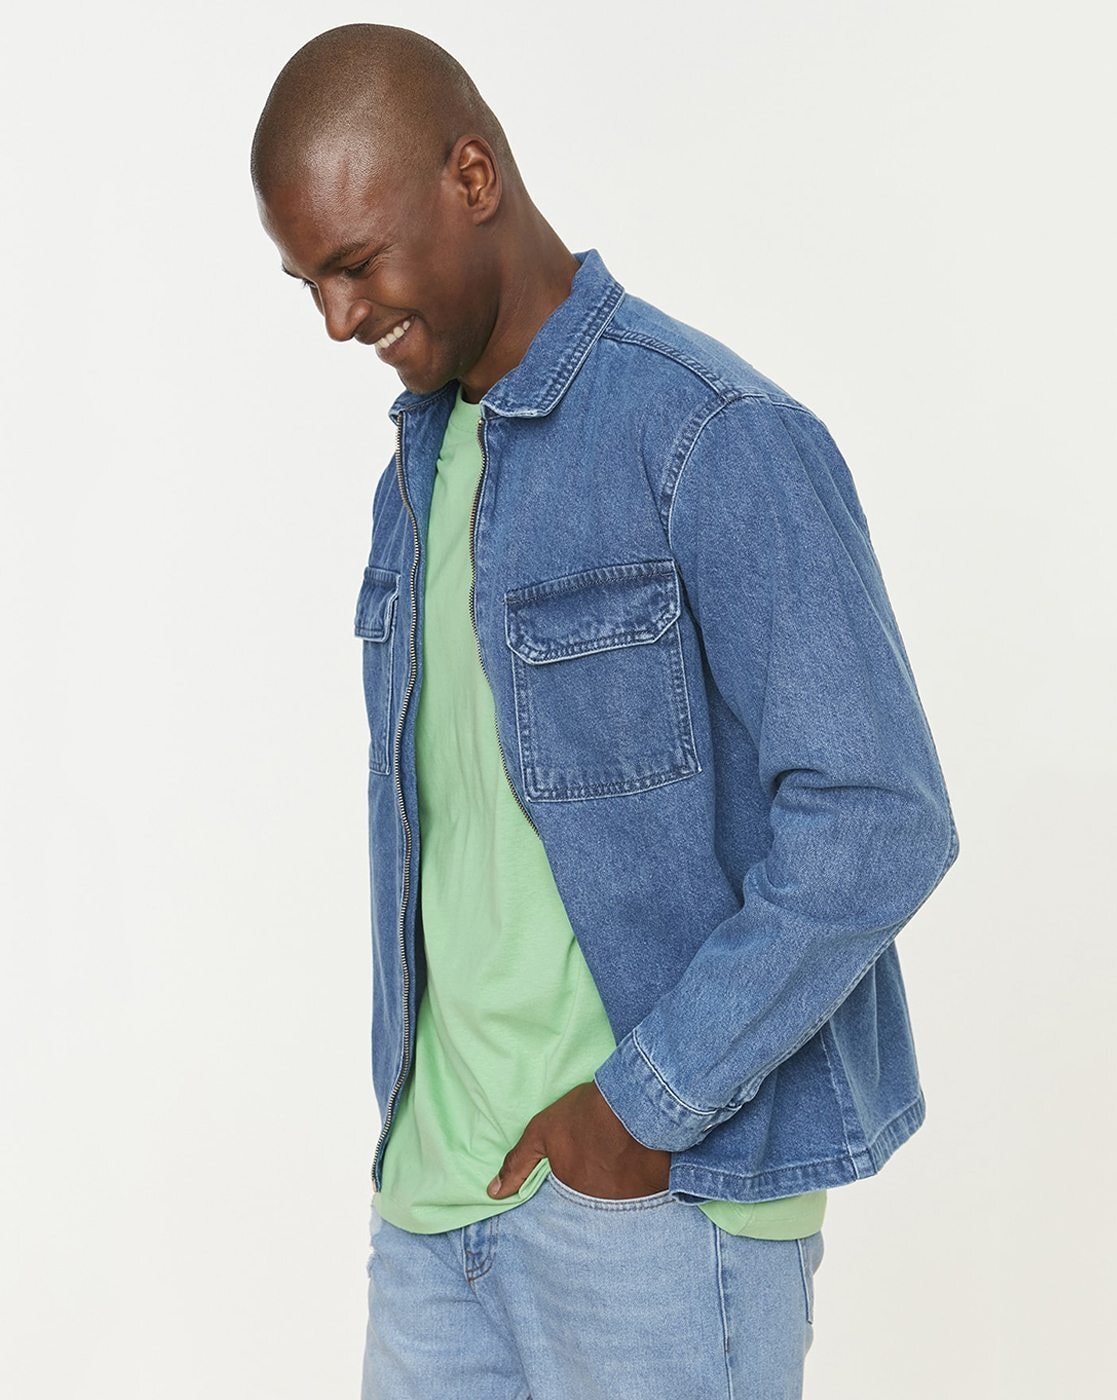 How To Wear & Style Denim Shirts For Men